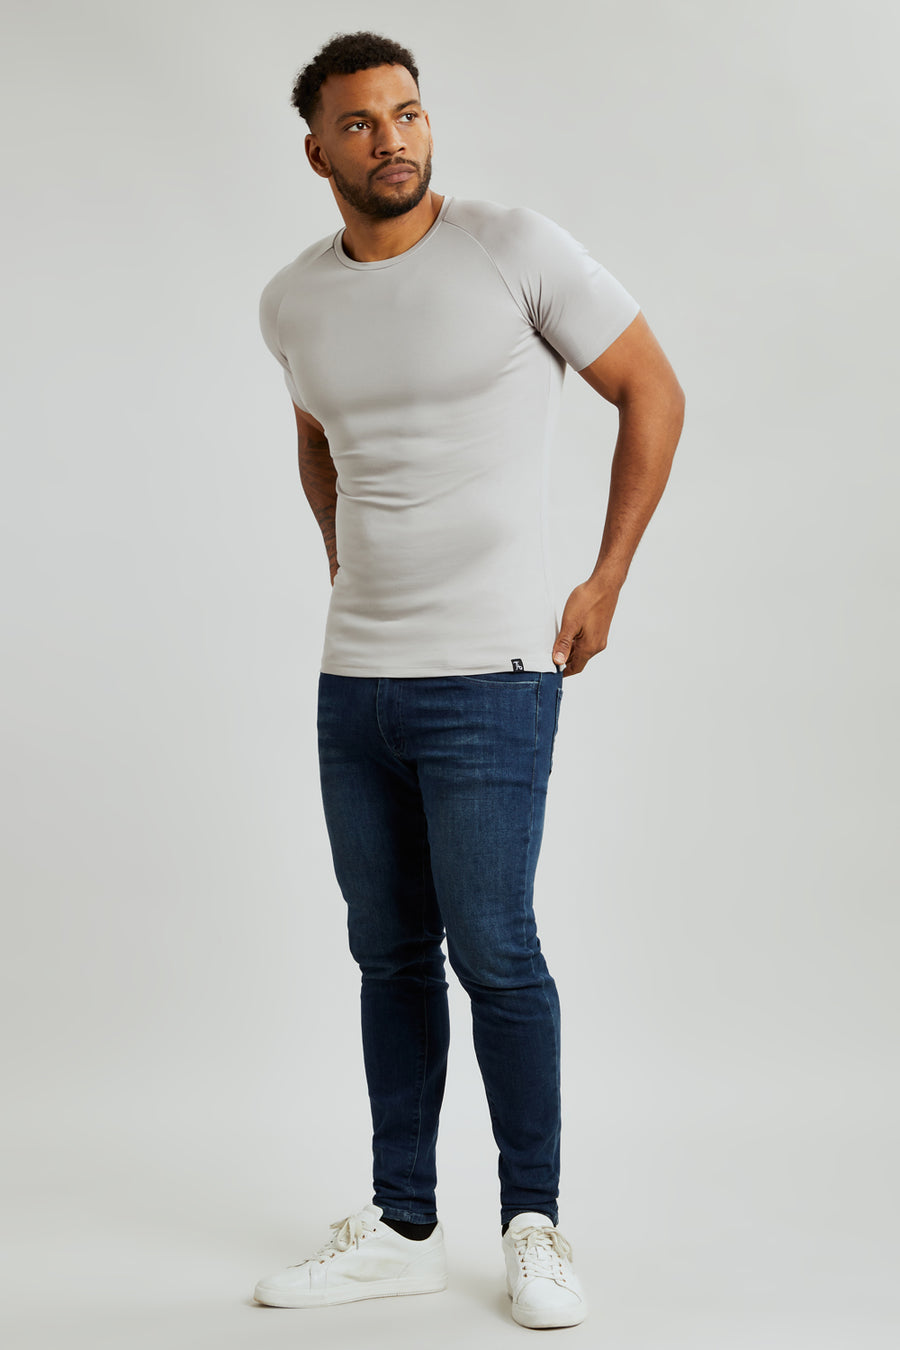 Athletic Fit T-Shirts - Tailored Athlete - TAILORED ATHLETE